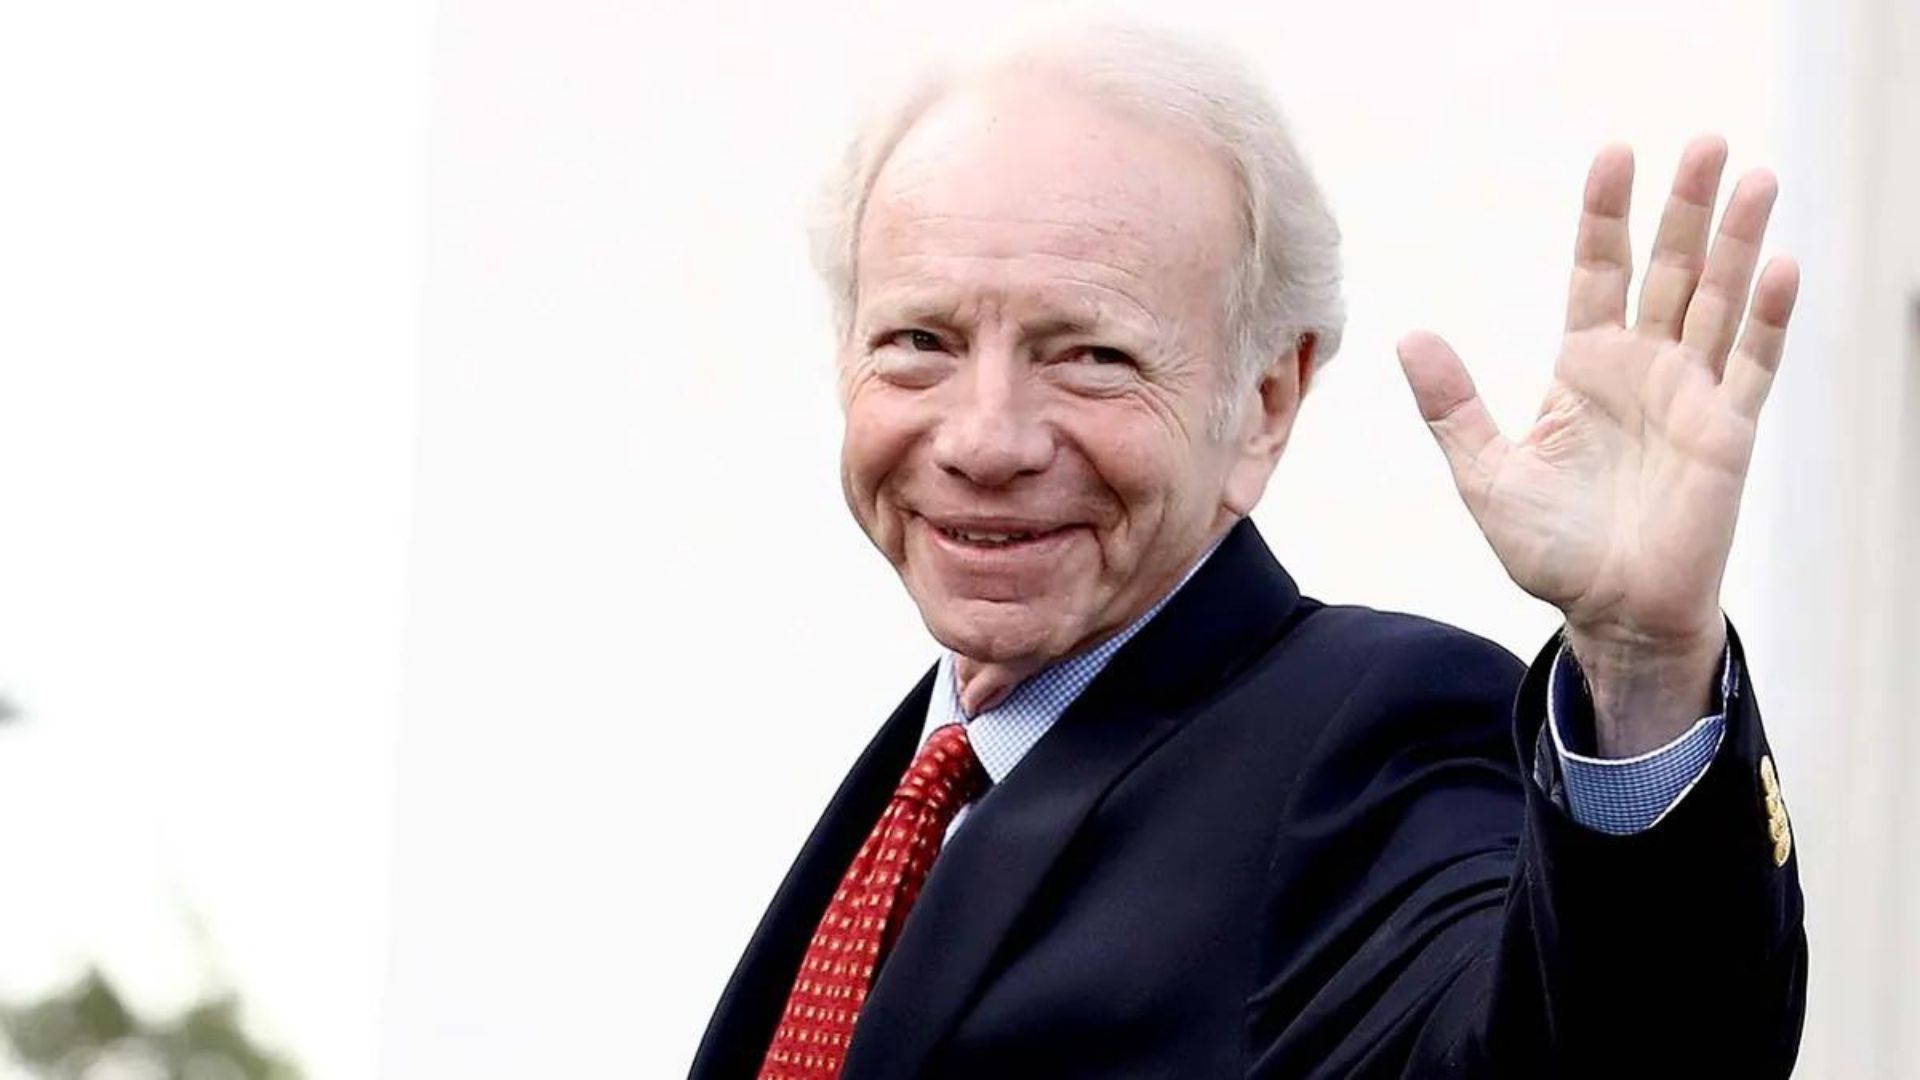 Know About Joe Lieberman's Wife And His Death